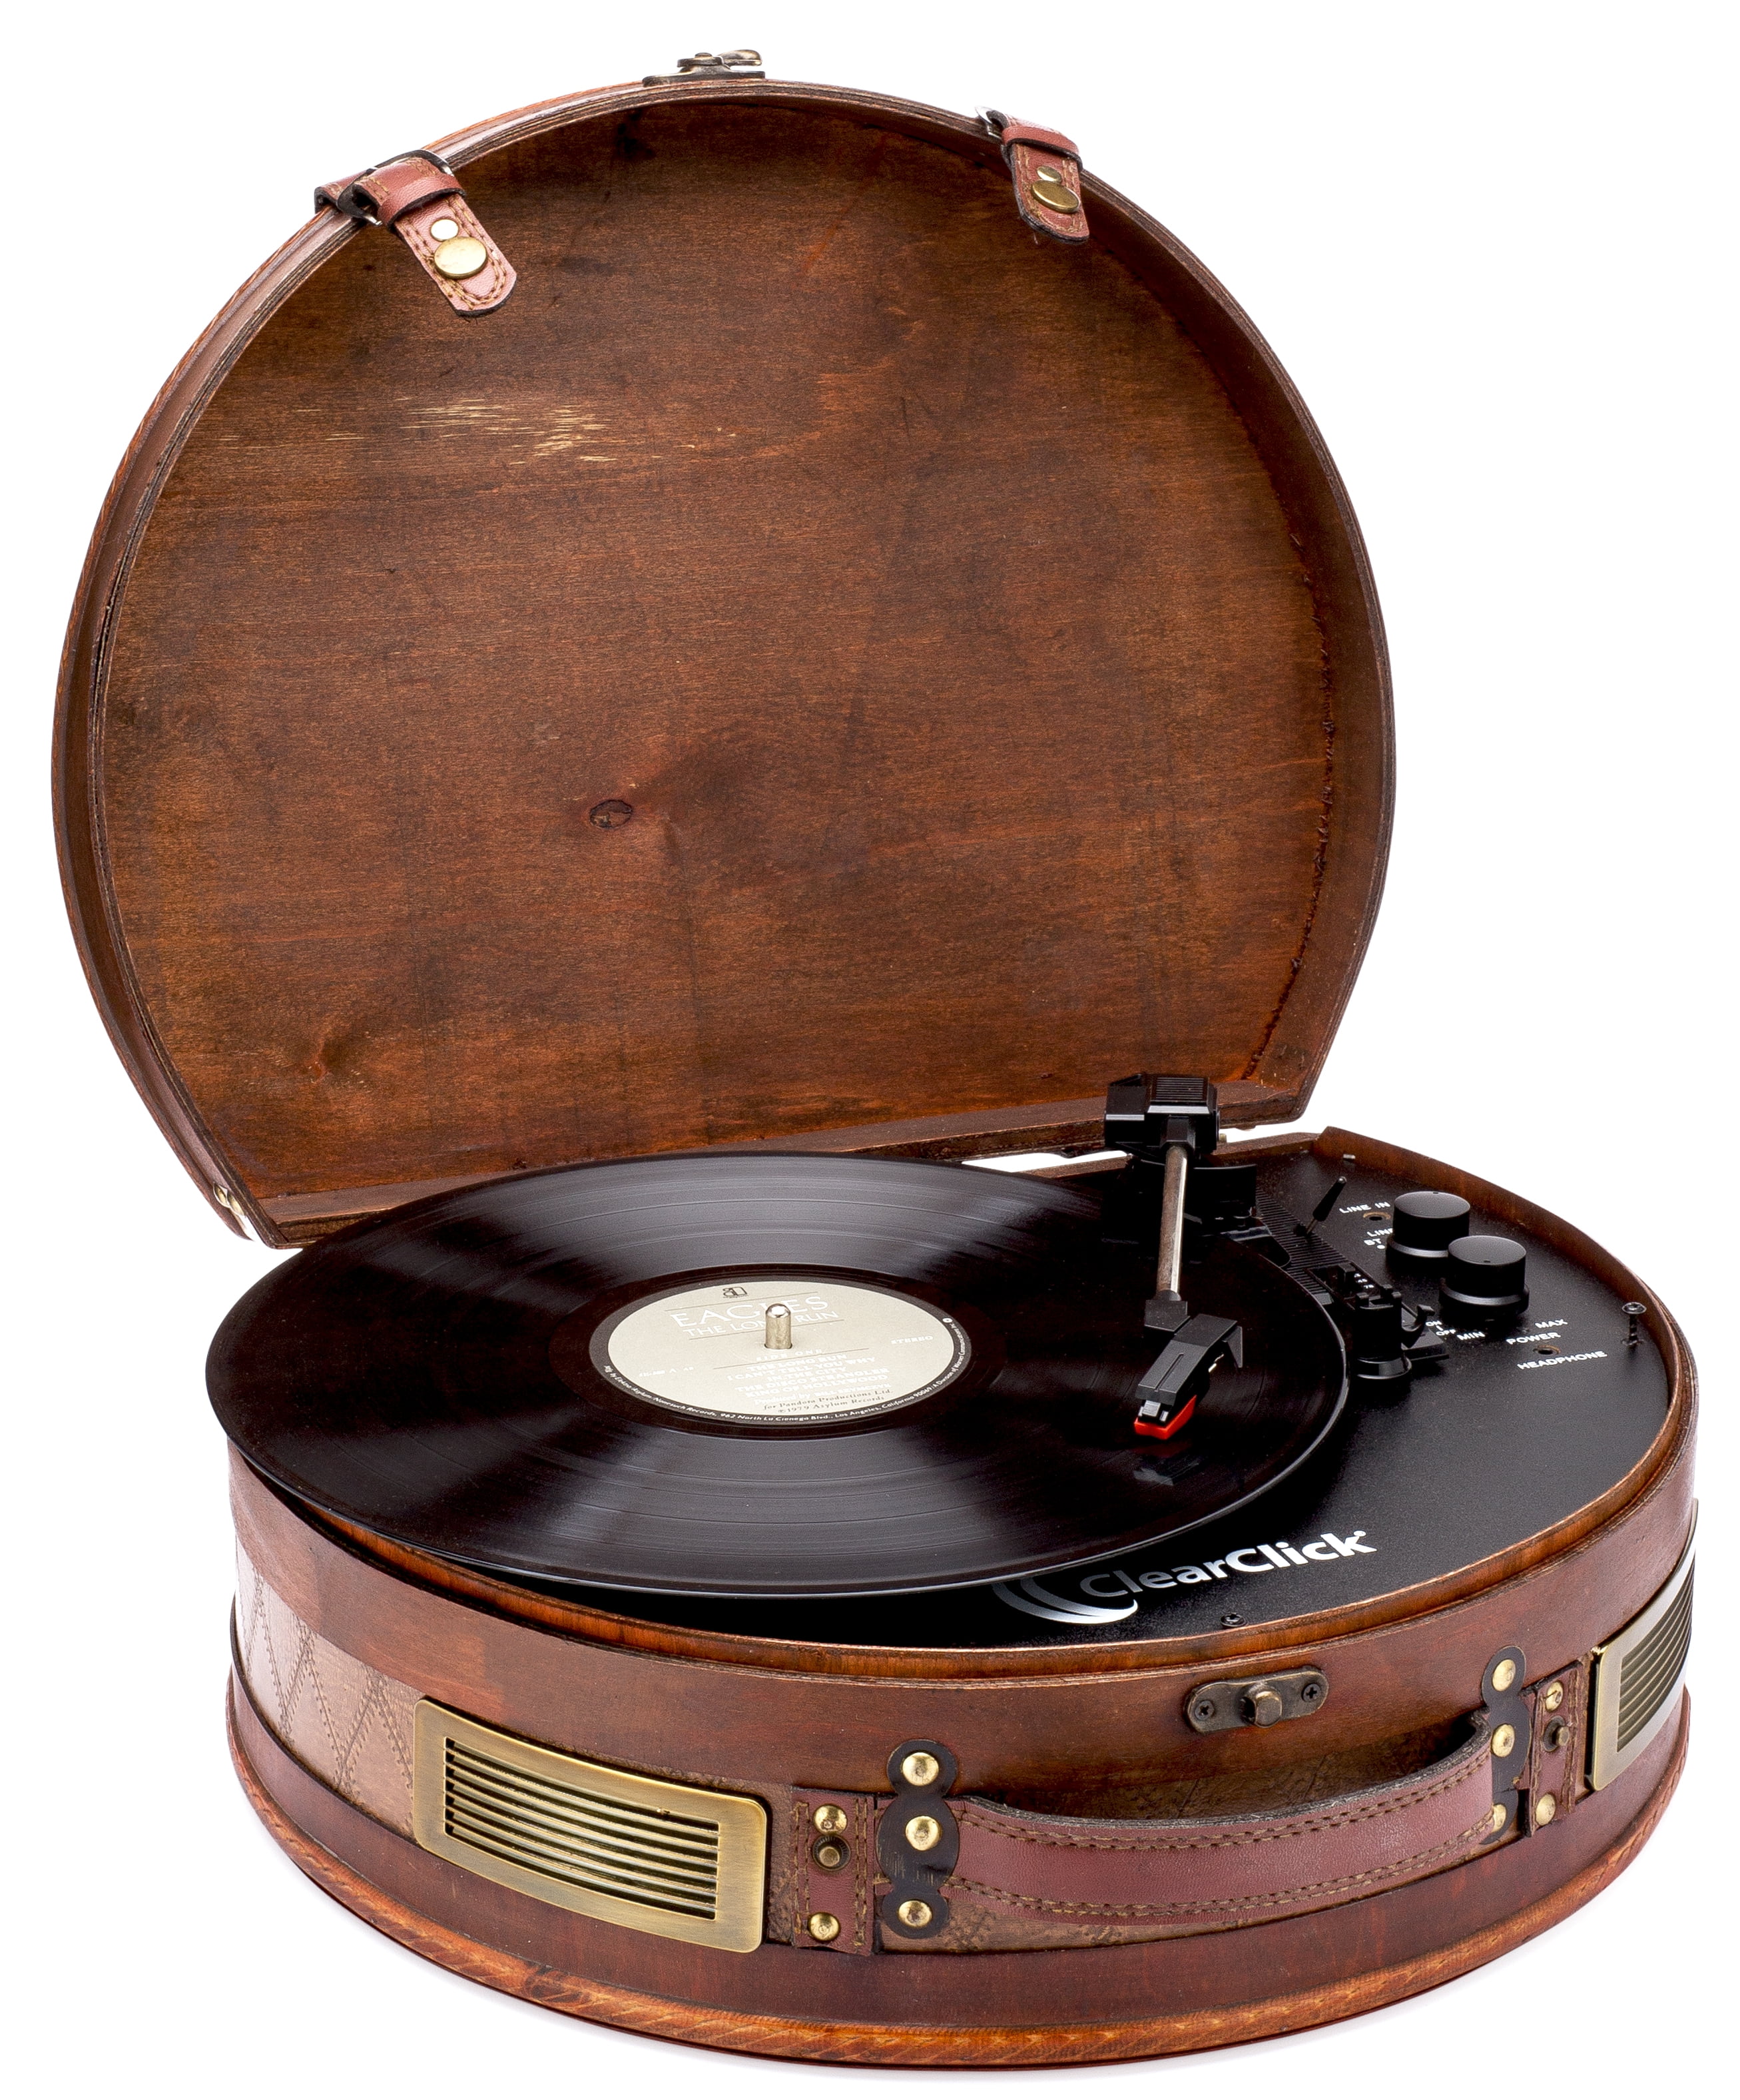 guiden Watchful rotation ClearClick Vintage Suitcase Turntable with Bluetooth & USB - Classic Wooden  Retro Style - Walmart.com